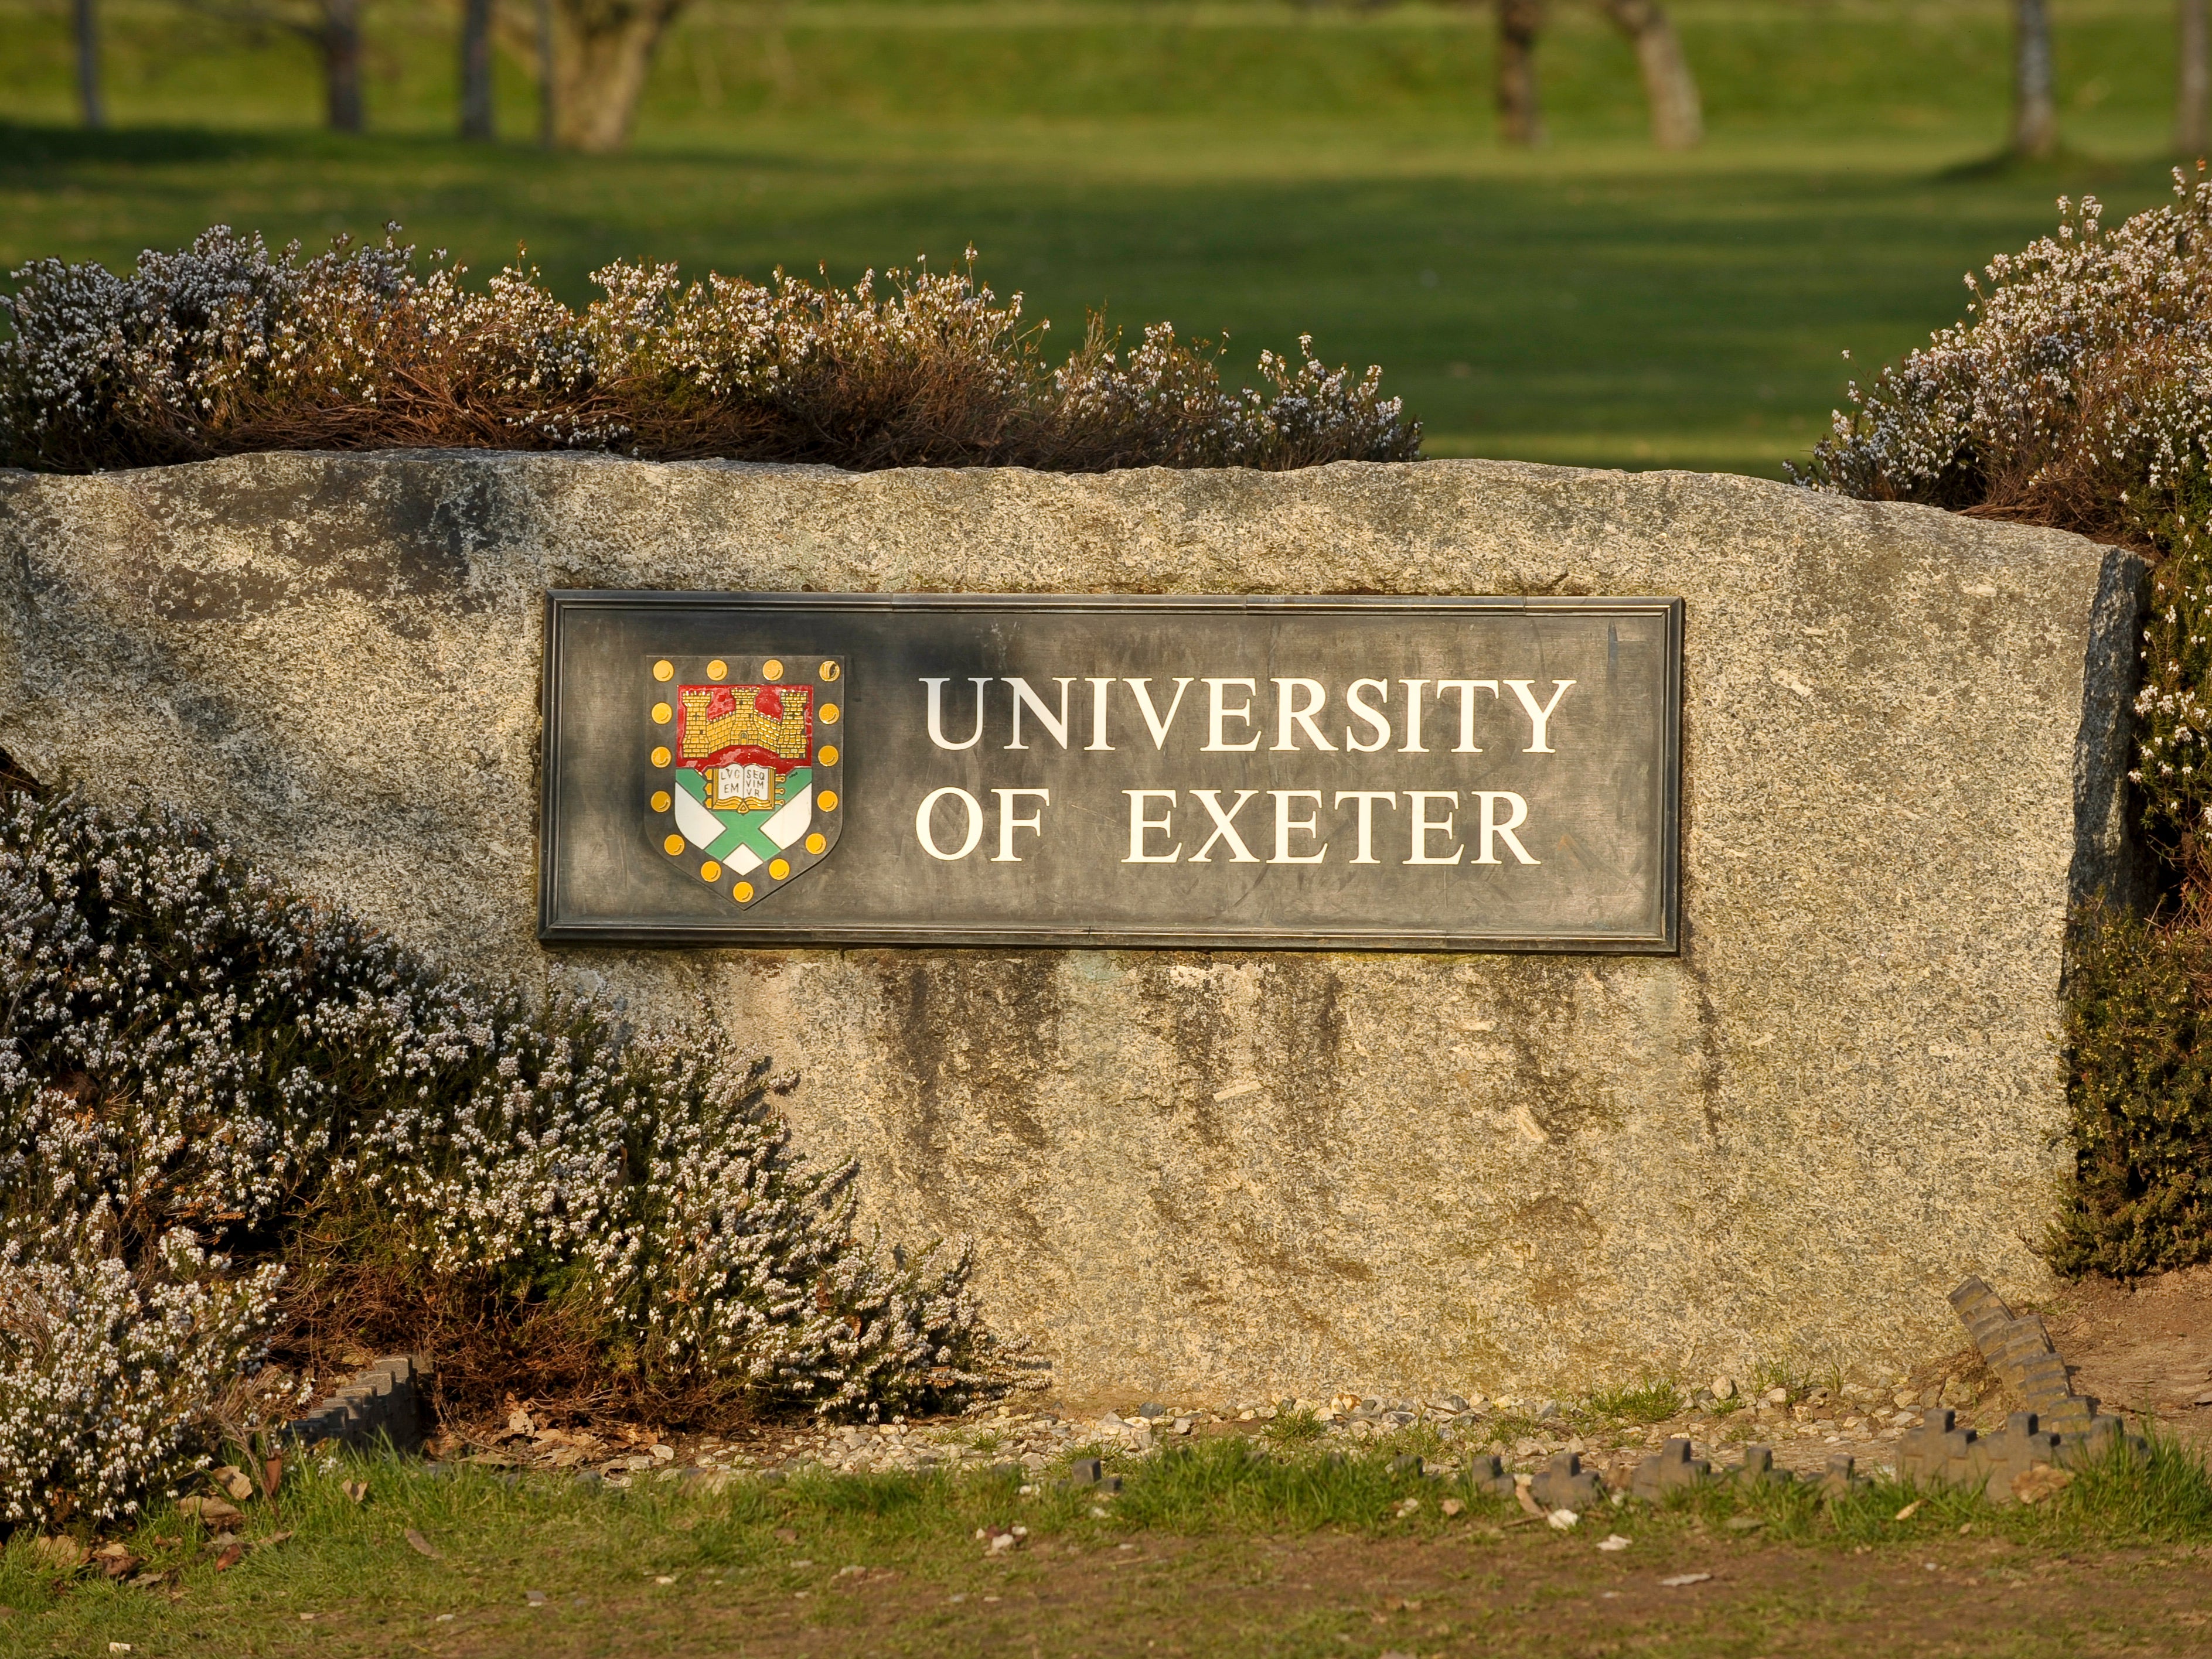 A senior academic has been awarded £101,000 after an employment tribunal ruled she was unfairly dismissed by the University of Exeter